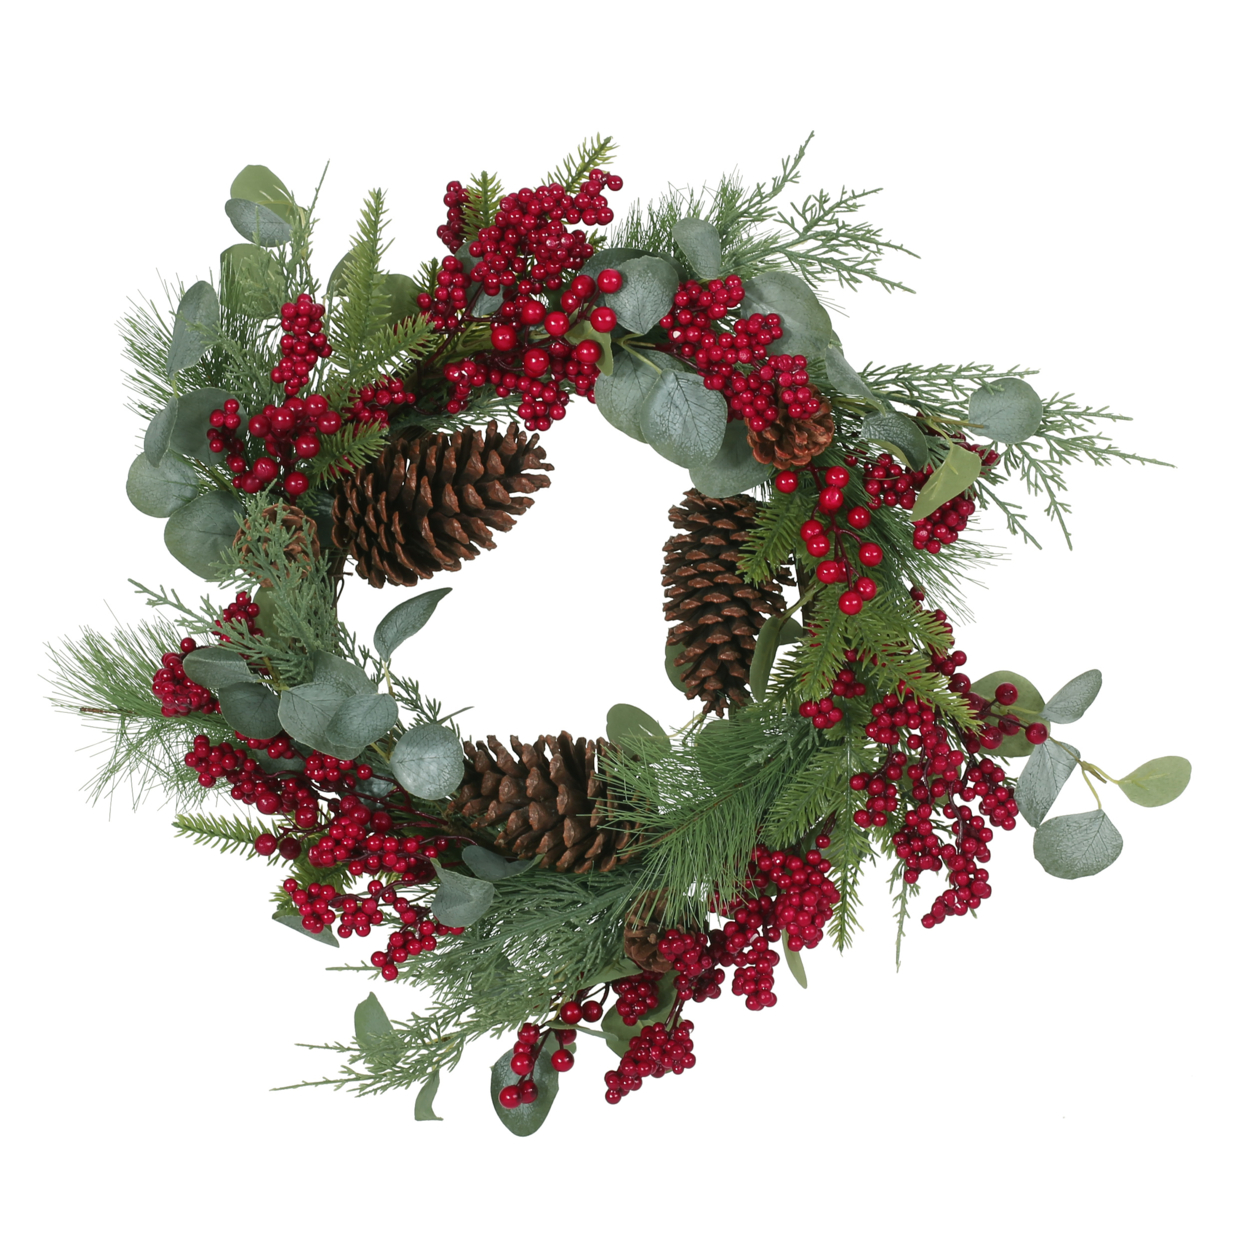 Torelli 22 Eucalyptus Artificial Wreath With Berries And Pinecones, Green And Red